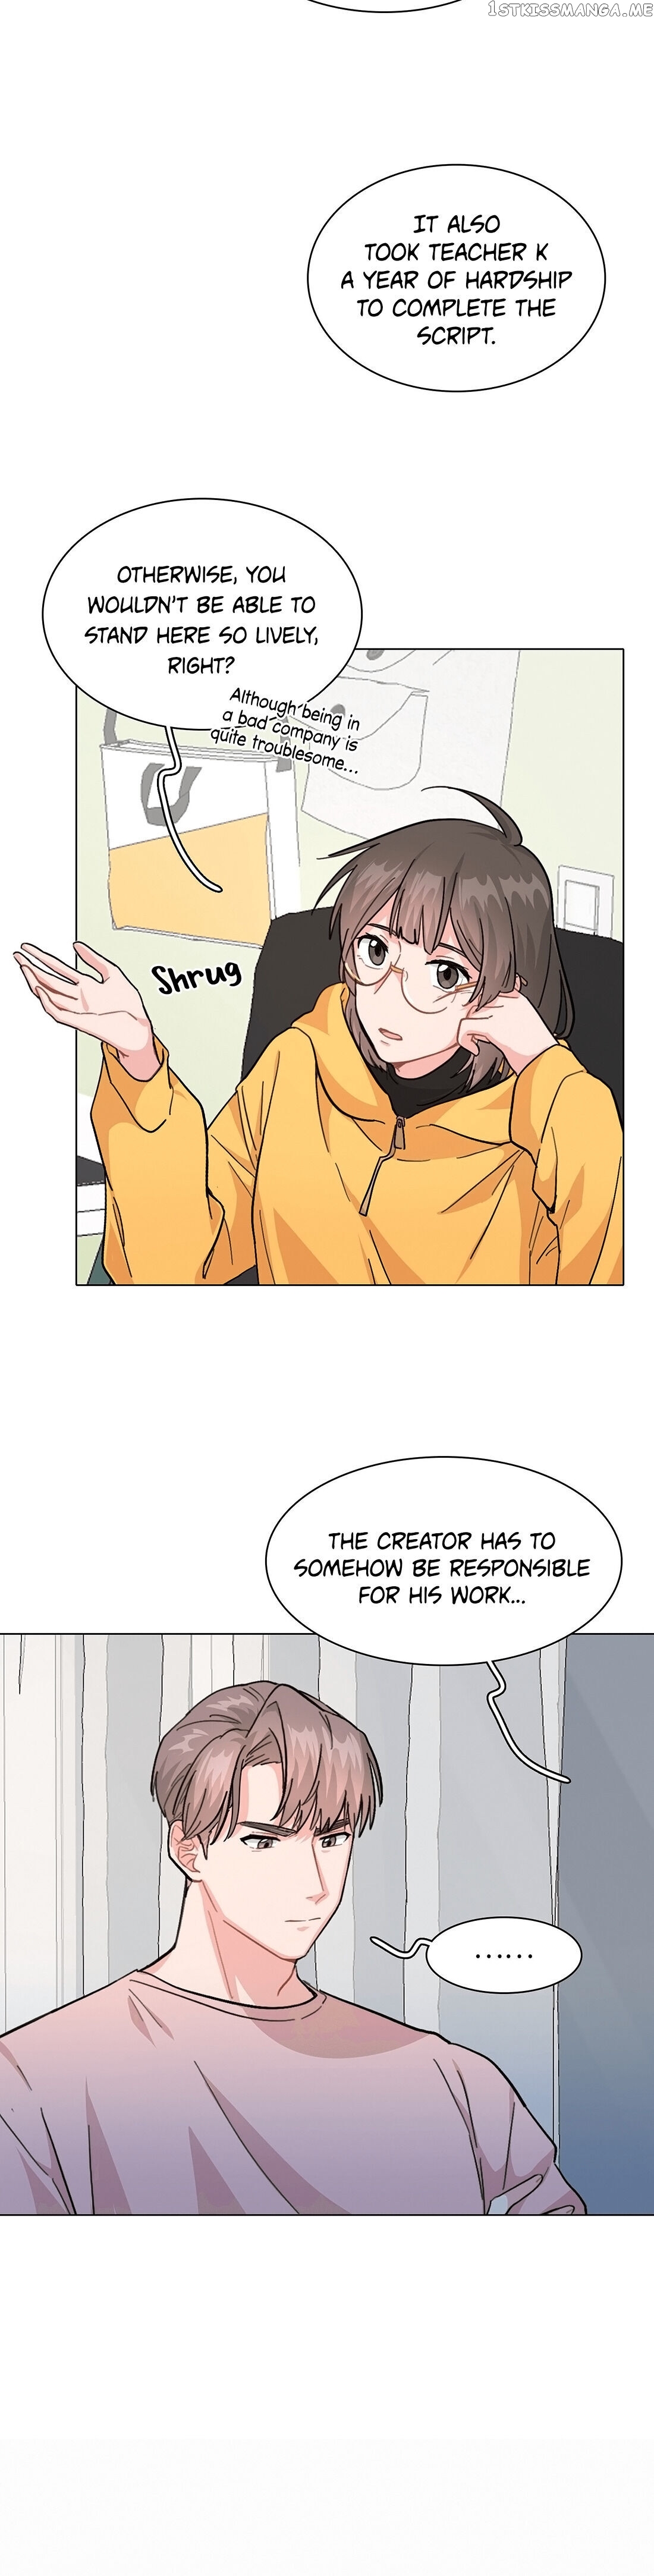 My Roommate Is A Narcissistic Manhua Character Chapter 4 - page 15